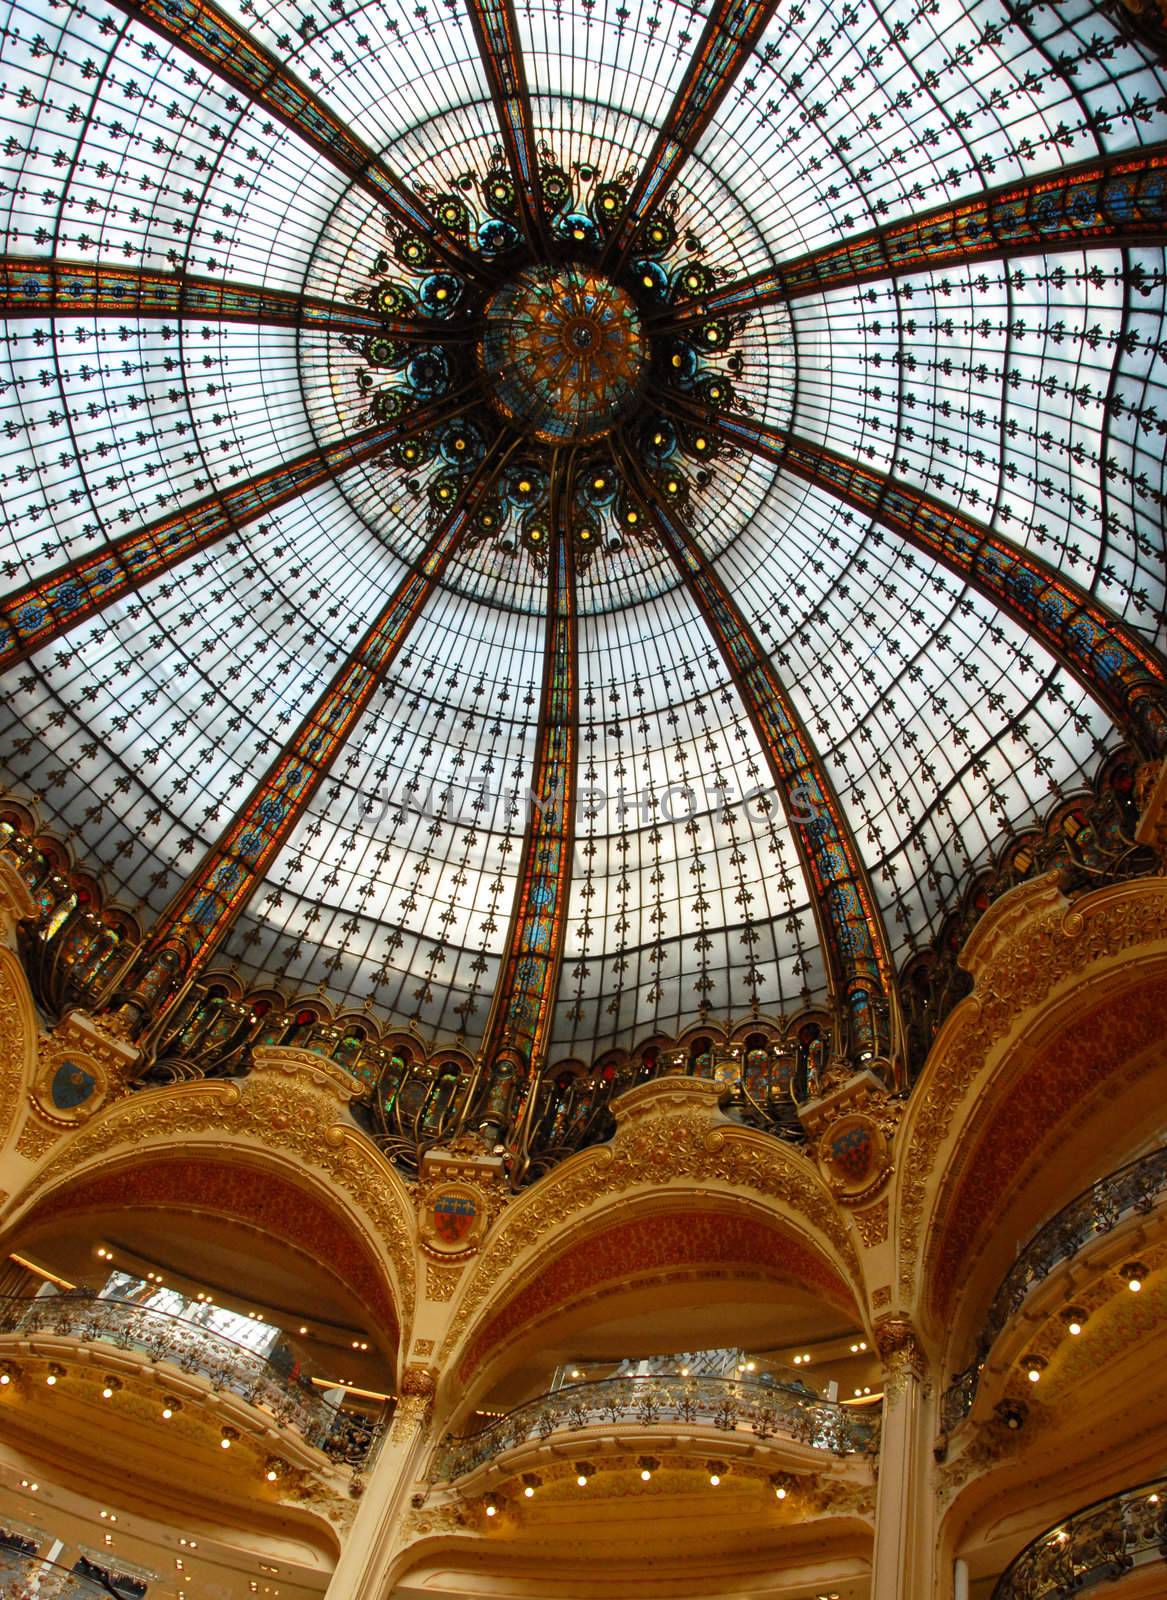 Galleries Lafayette dome,  in the center of Paris, France 